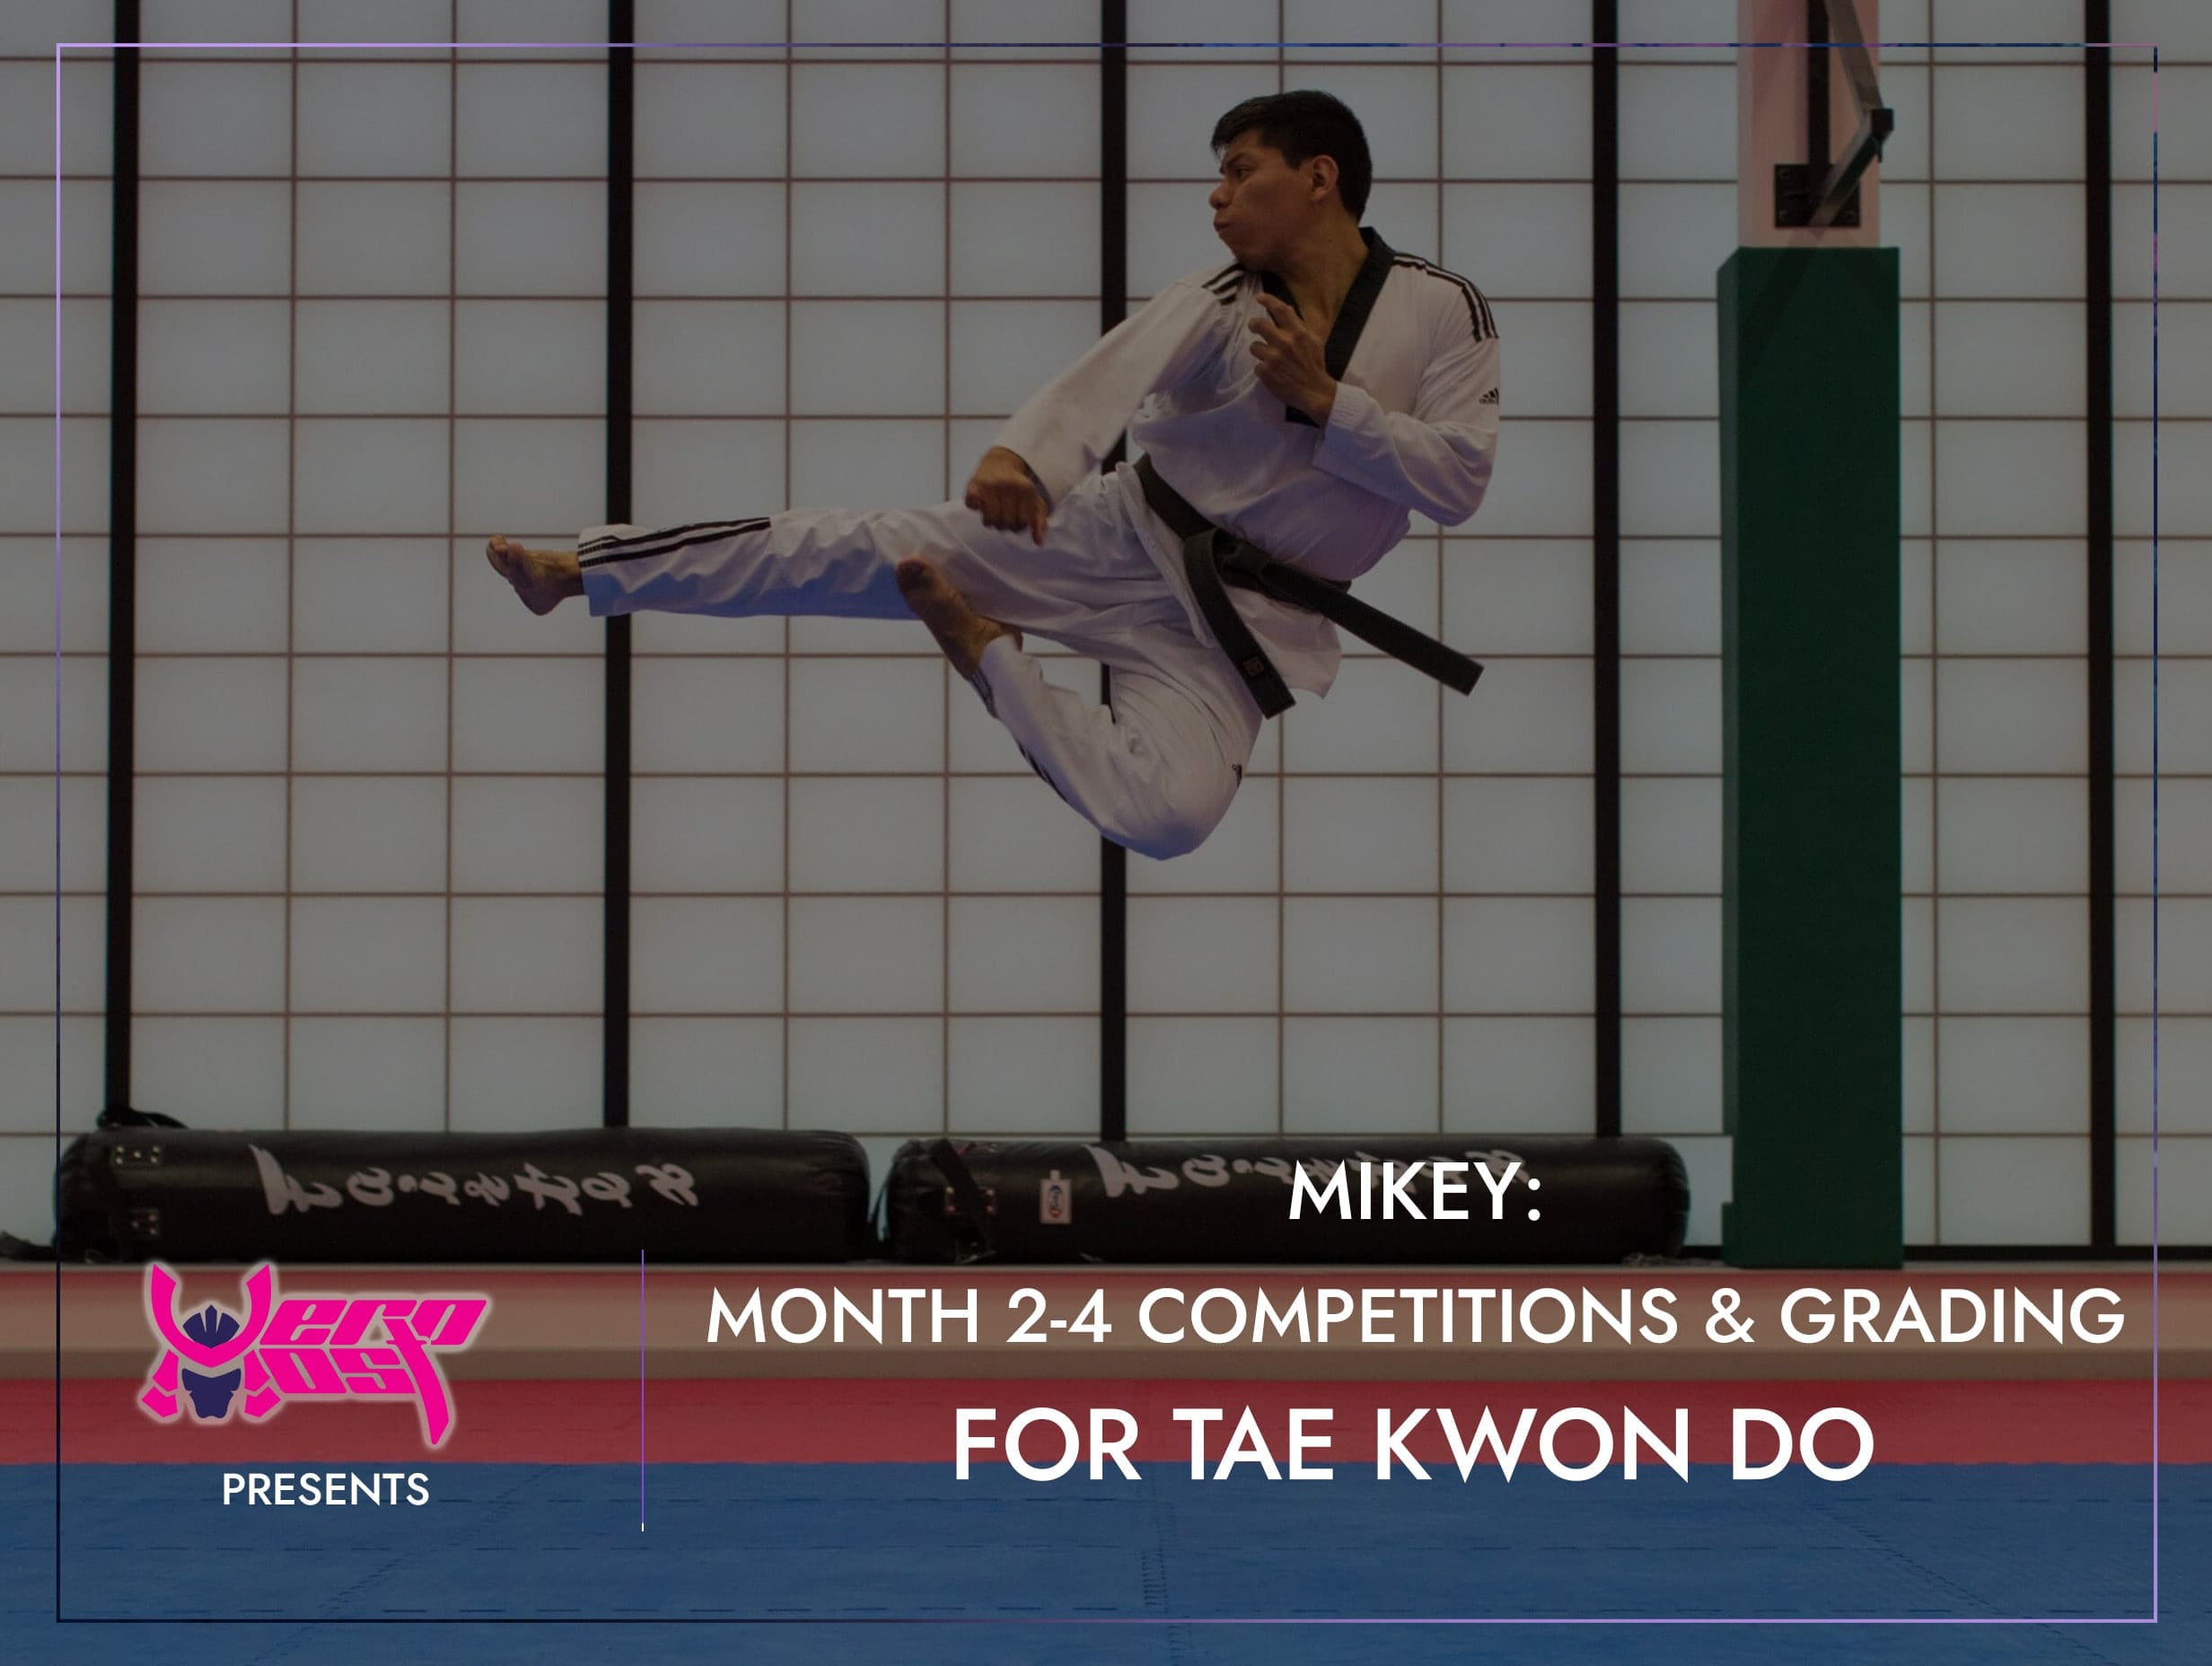 Tae Kwon Do 2-4 Month